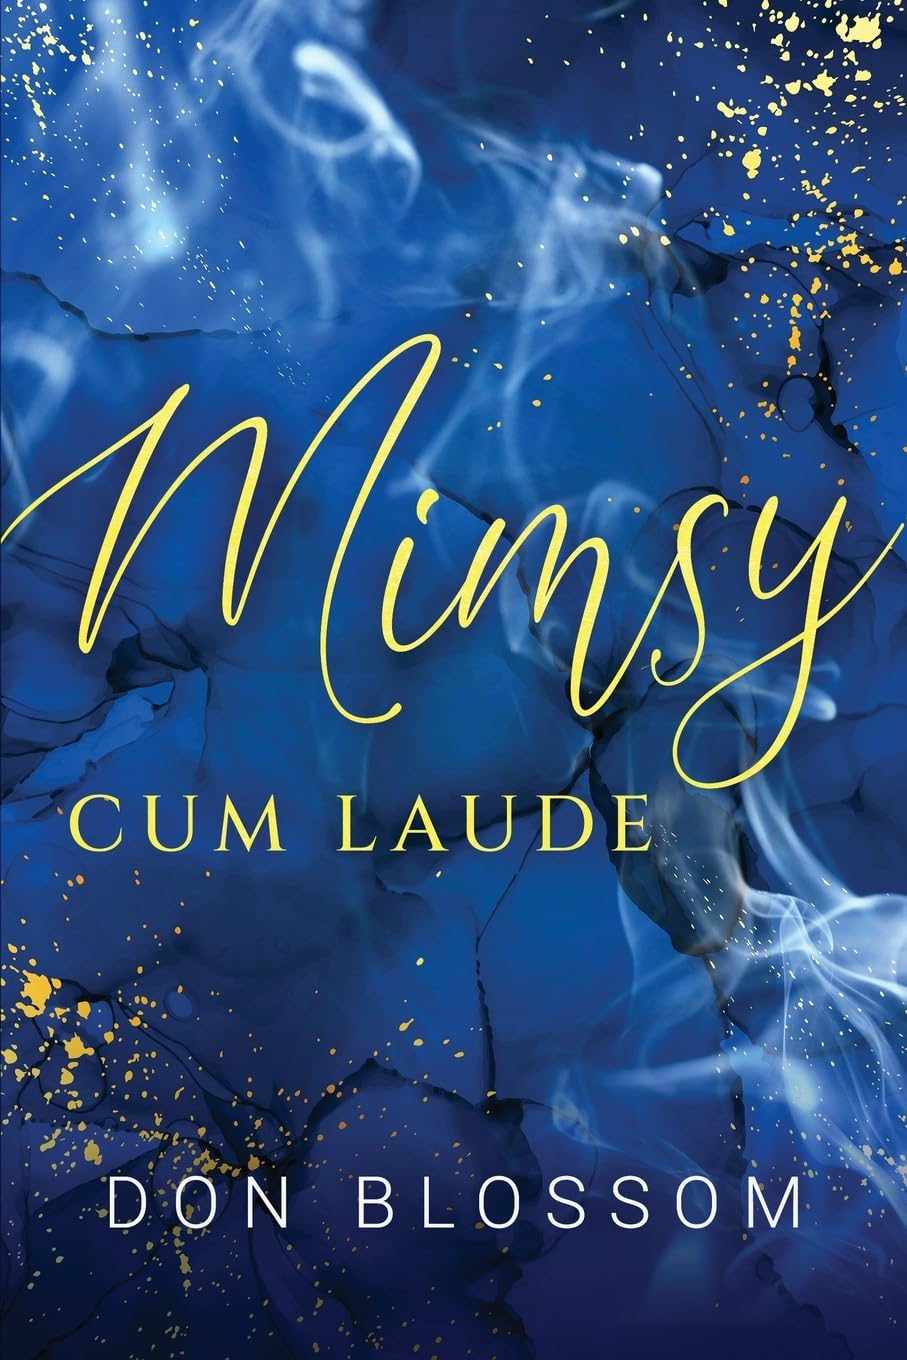 New memoir "MIMSY, Cum Laude" by Don Blossom is released, a romantic and tragic story of love, loss, forgiveness, and diverging lives